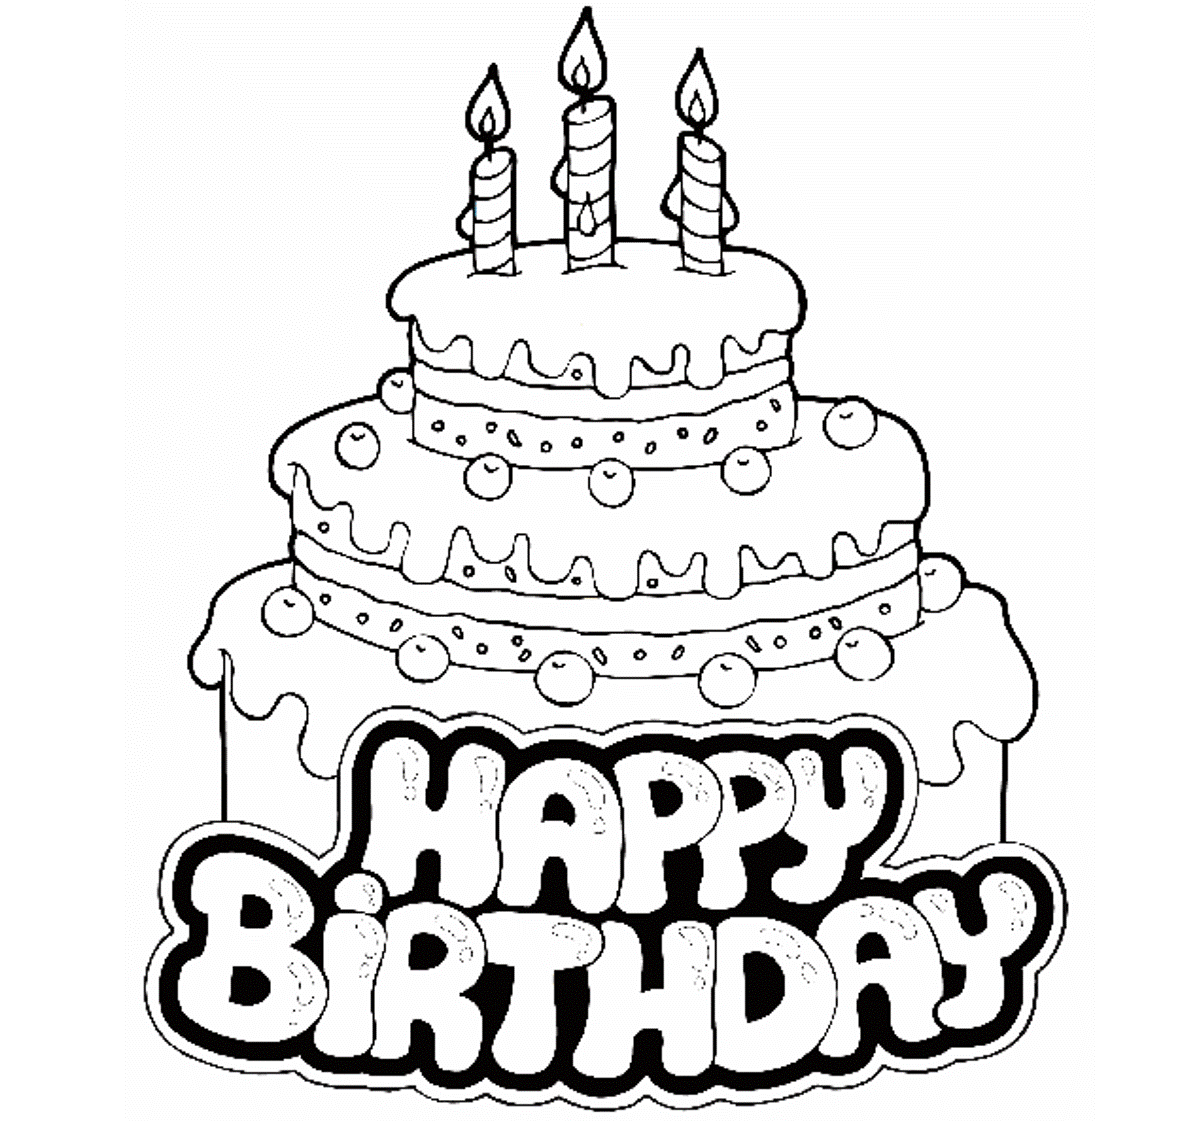 Free Birthday Cake Drawing, Download Free Clip Art, Free Clip Art on.